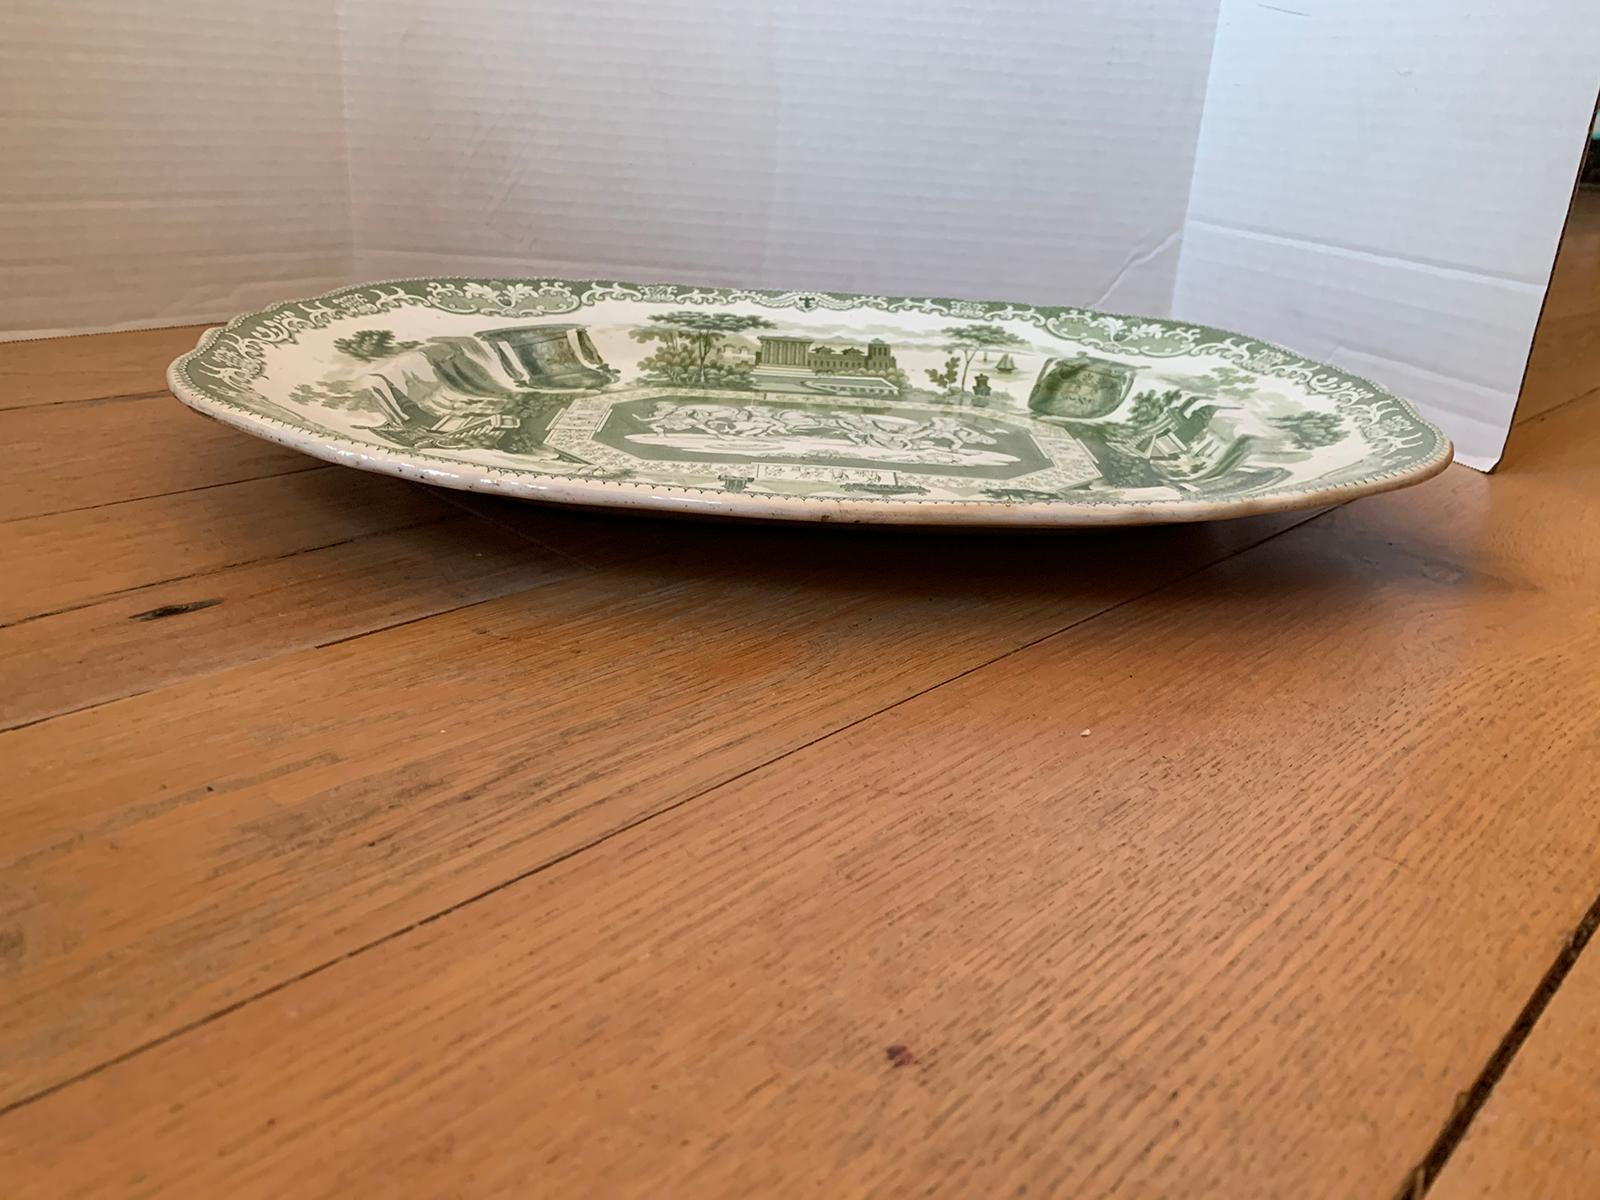 19th Century English Green and White Transferware Stone China Oval Charger For Sale 2